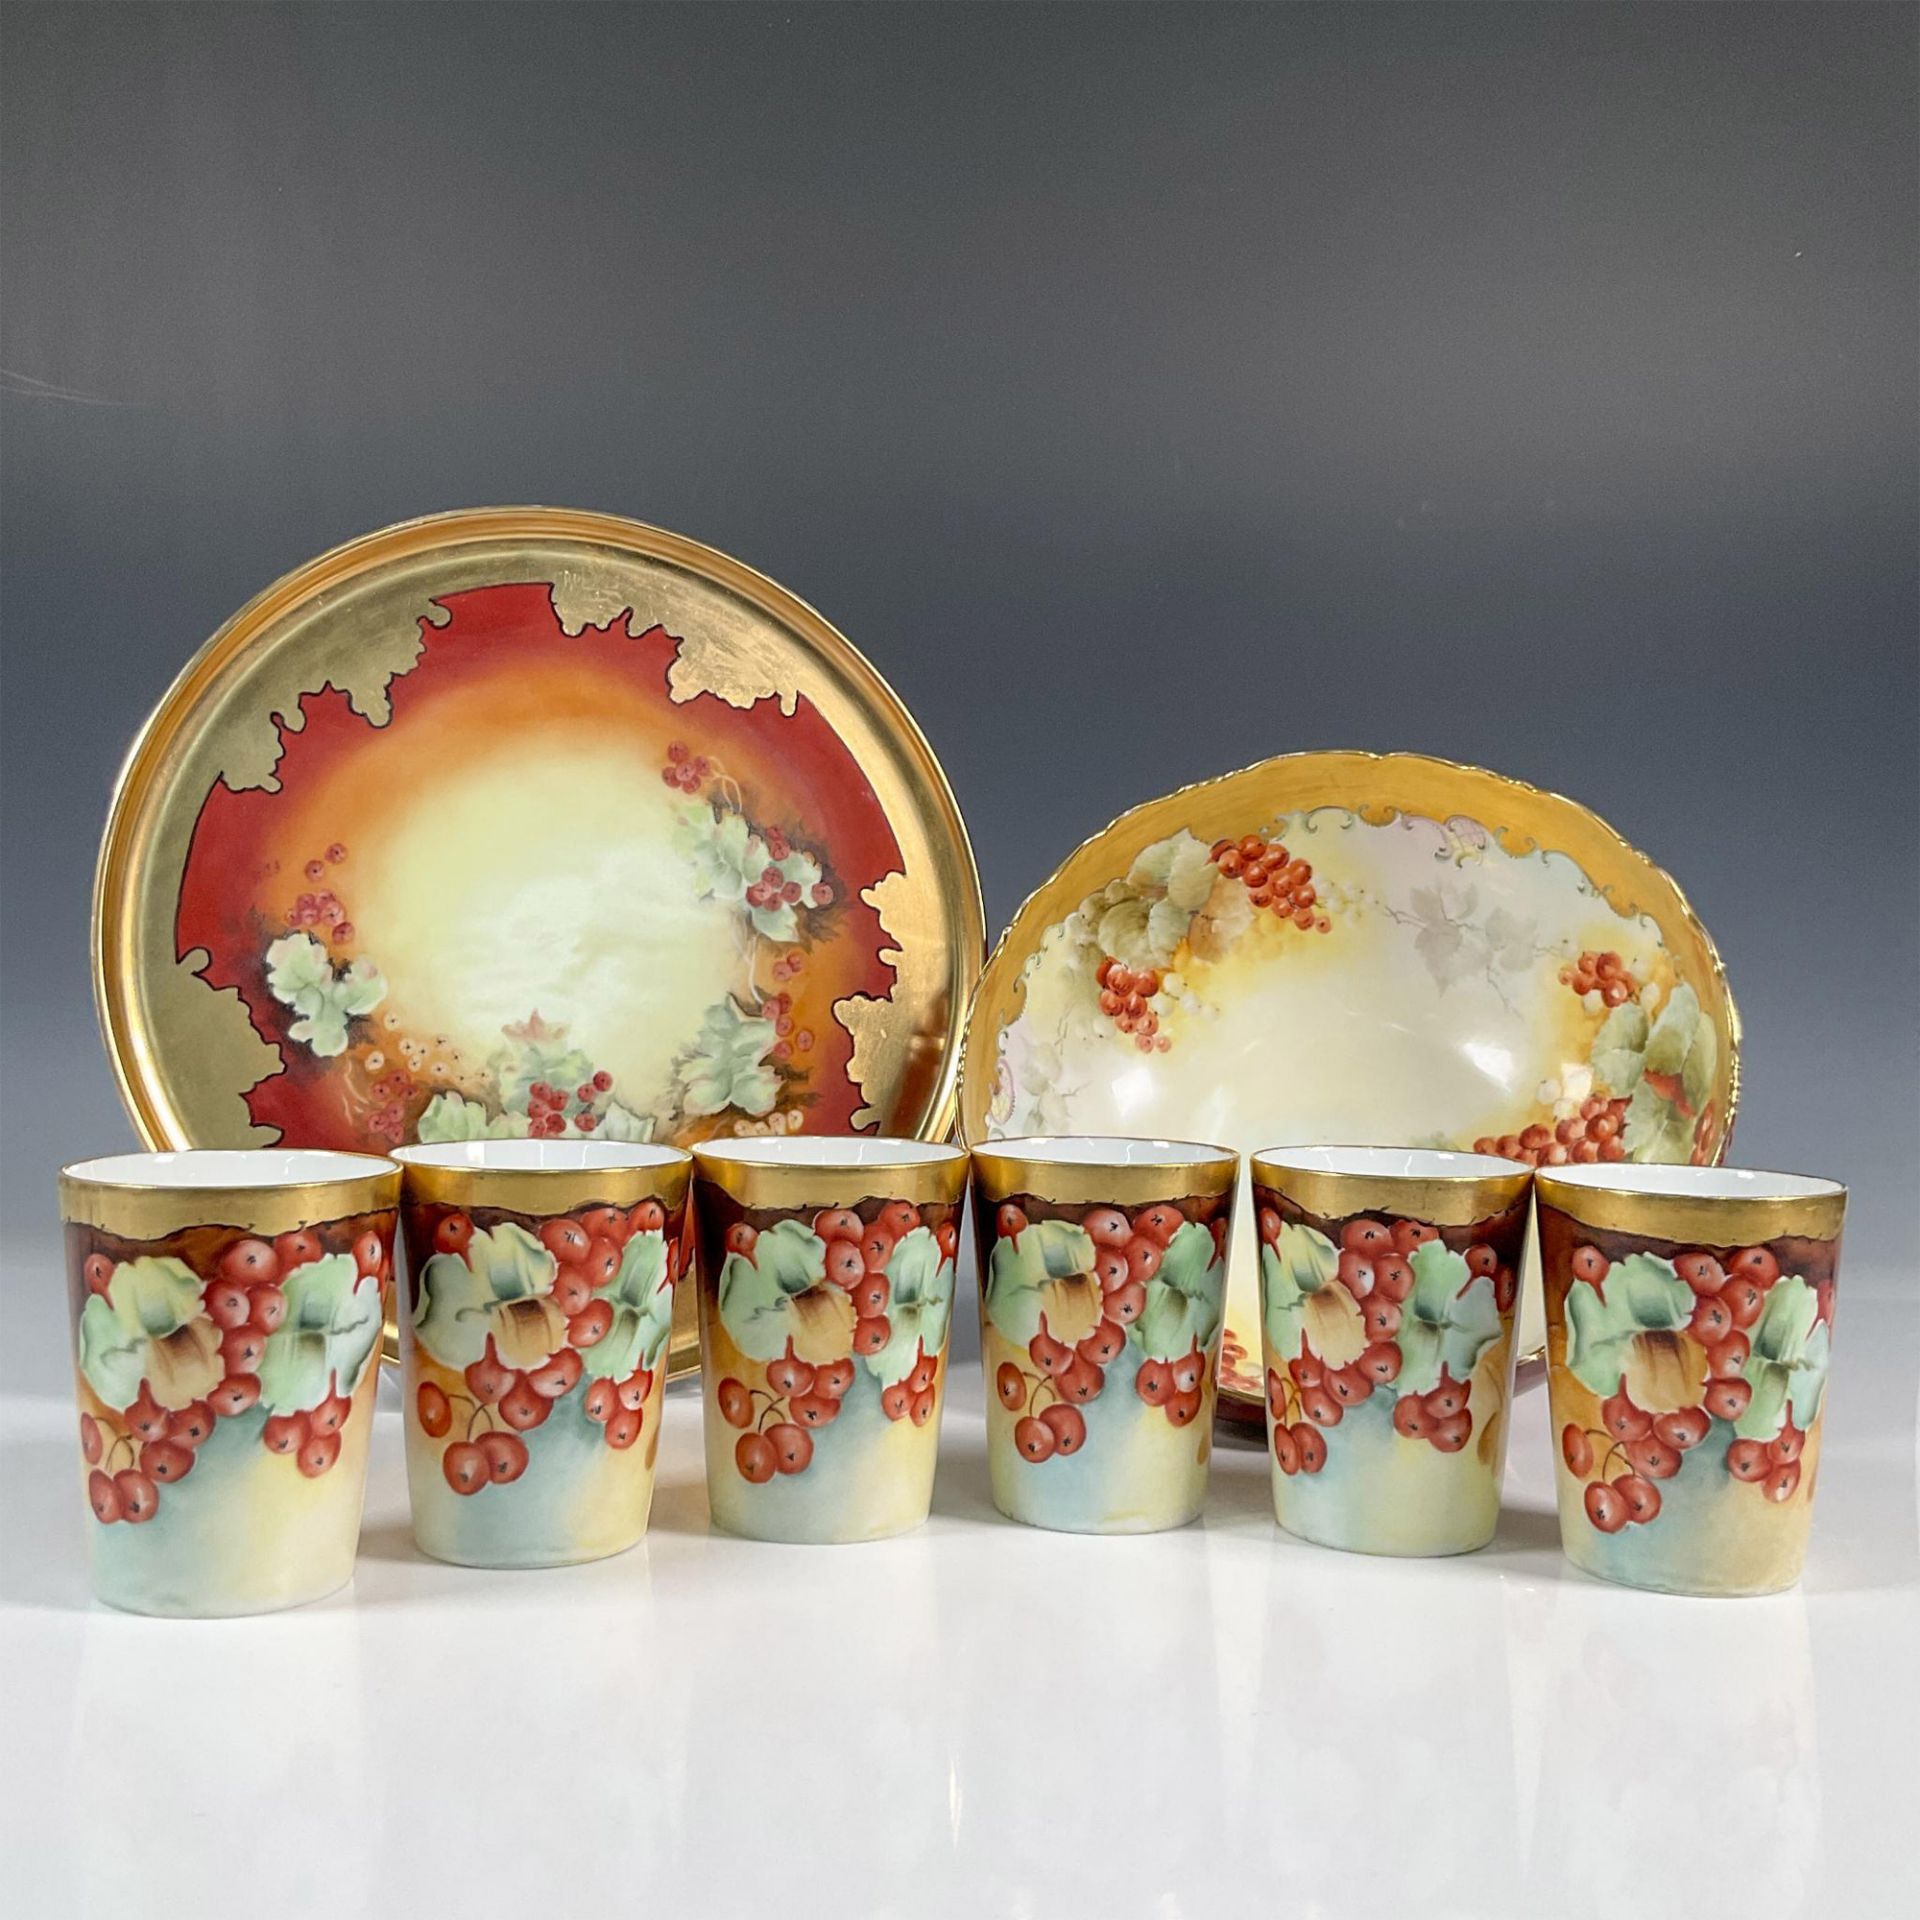 8pc Mixed Lot of Limoges Porcelain Tableware - Image 6 of 7